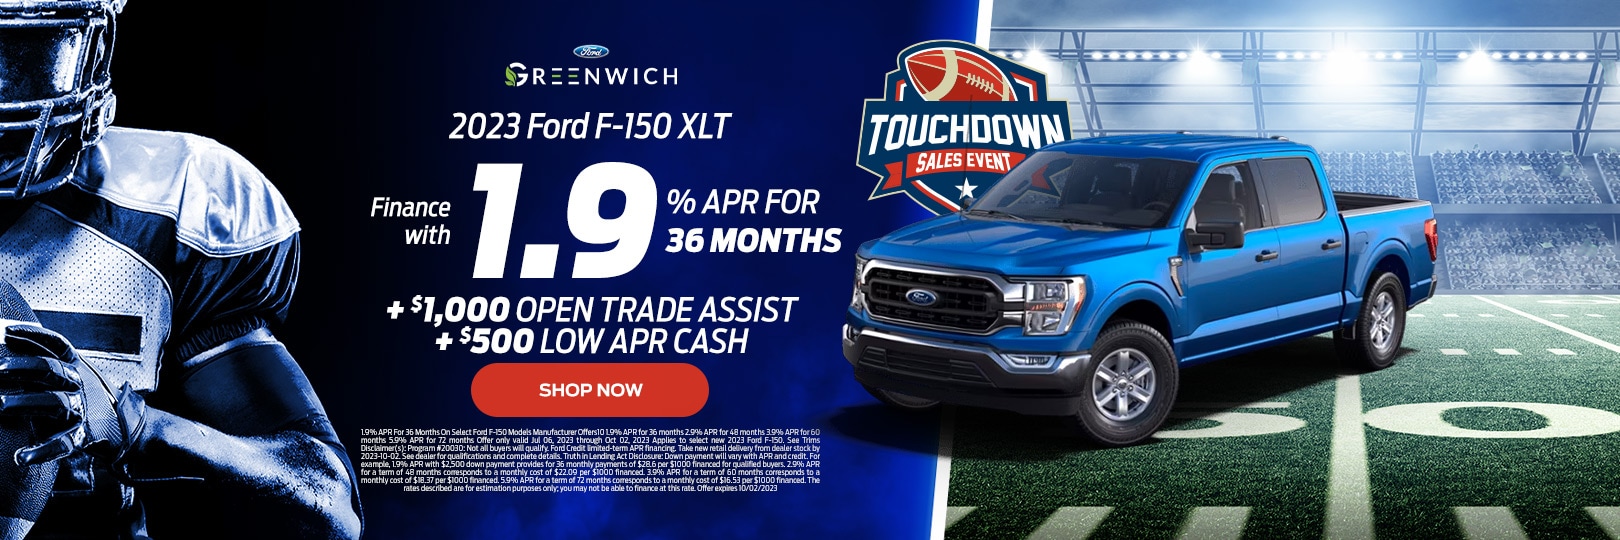 Greenwich Ford Dealer | Ford Sales & Auto Service in NY